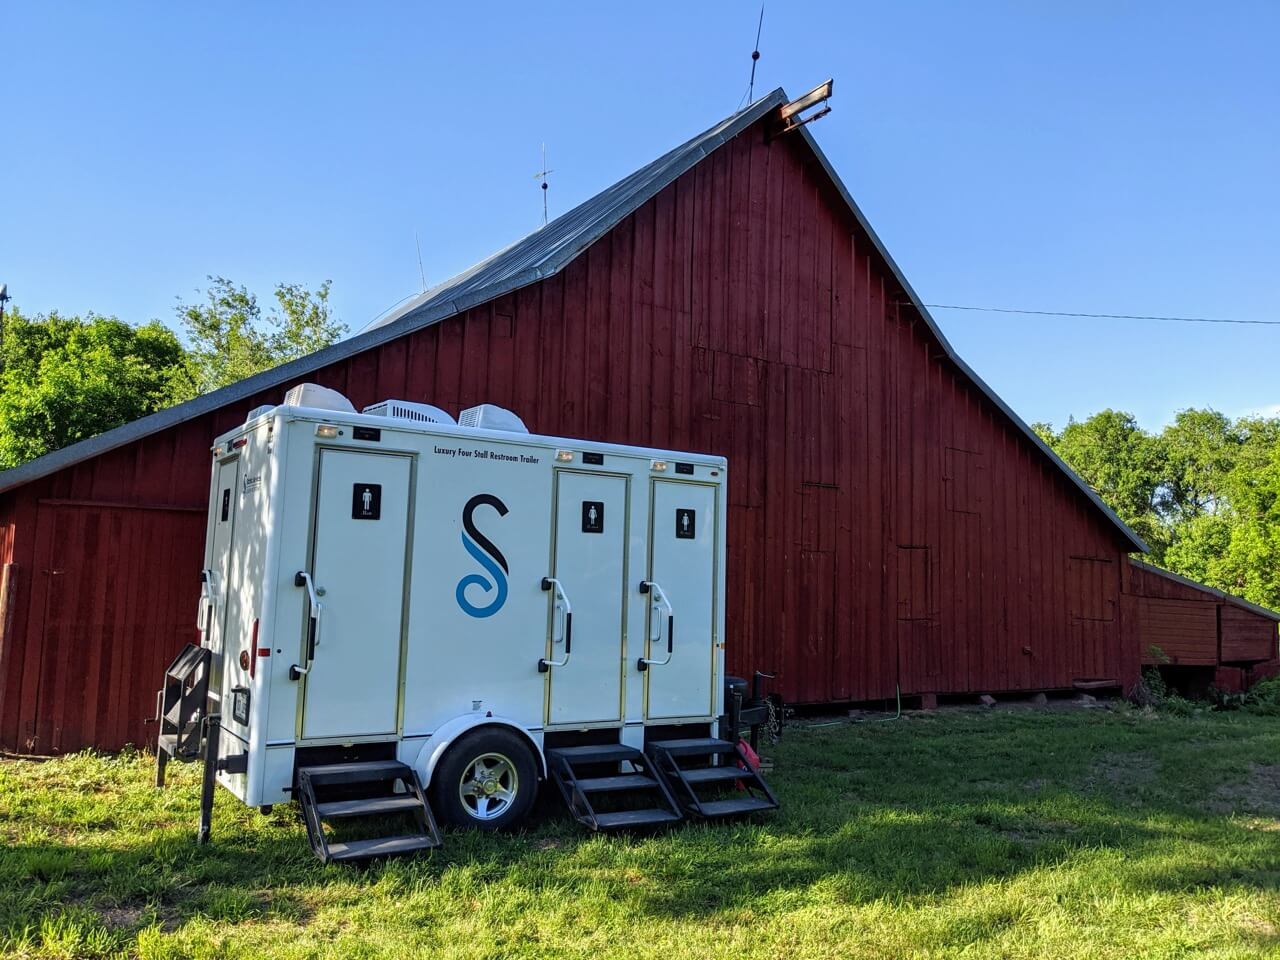 a white 4 stall restroom trailer rental is parked on grass next to a large red barn under a clear blue sky.